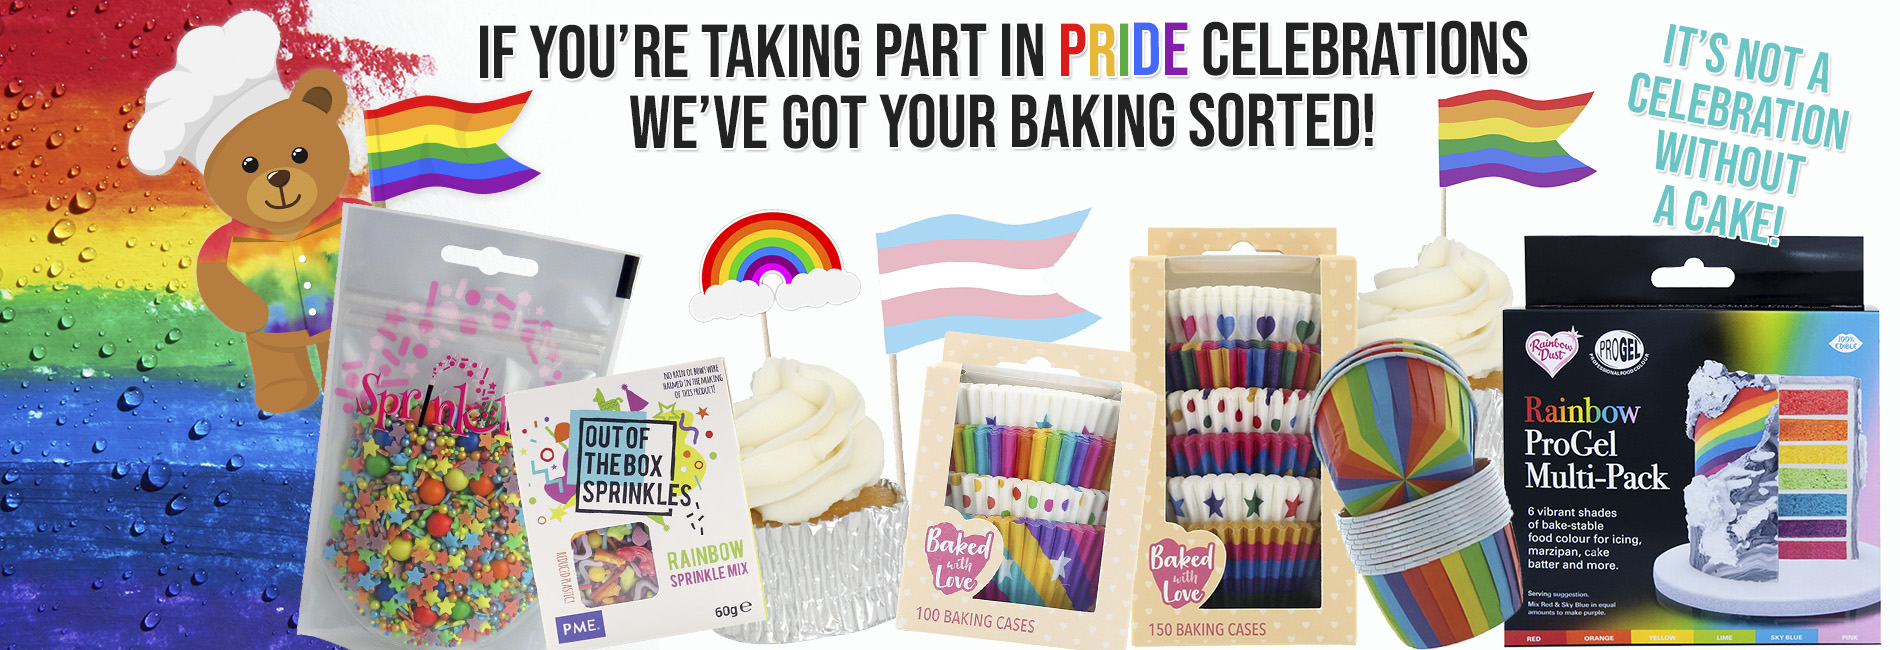 Everything you need for your Pride celebration cupcakes & bakes